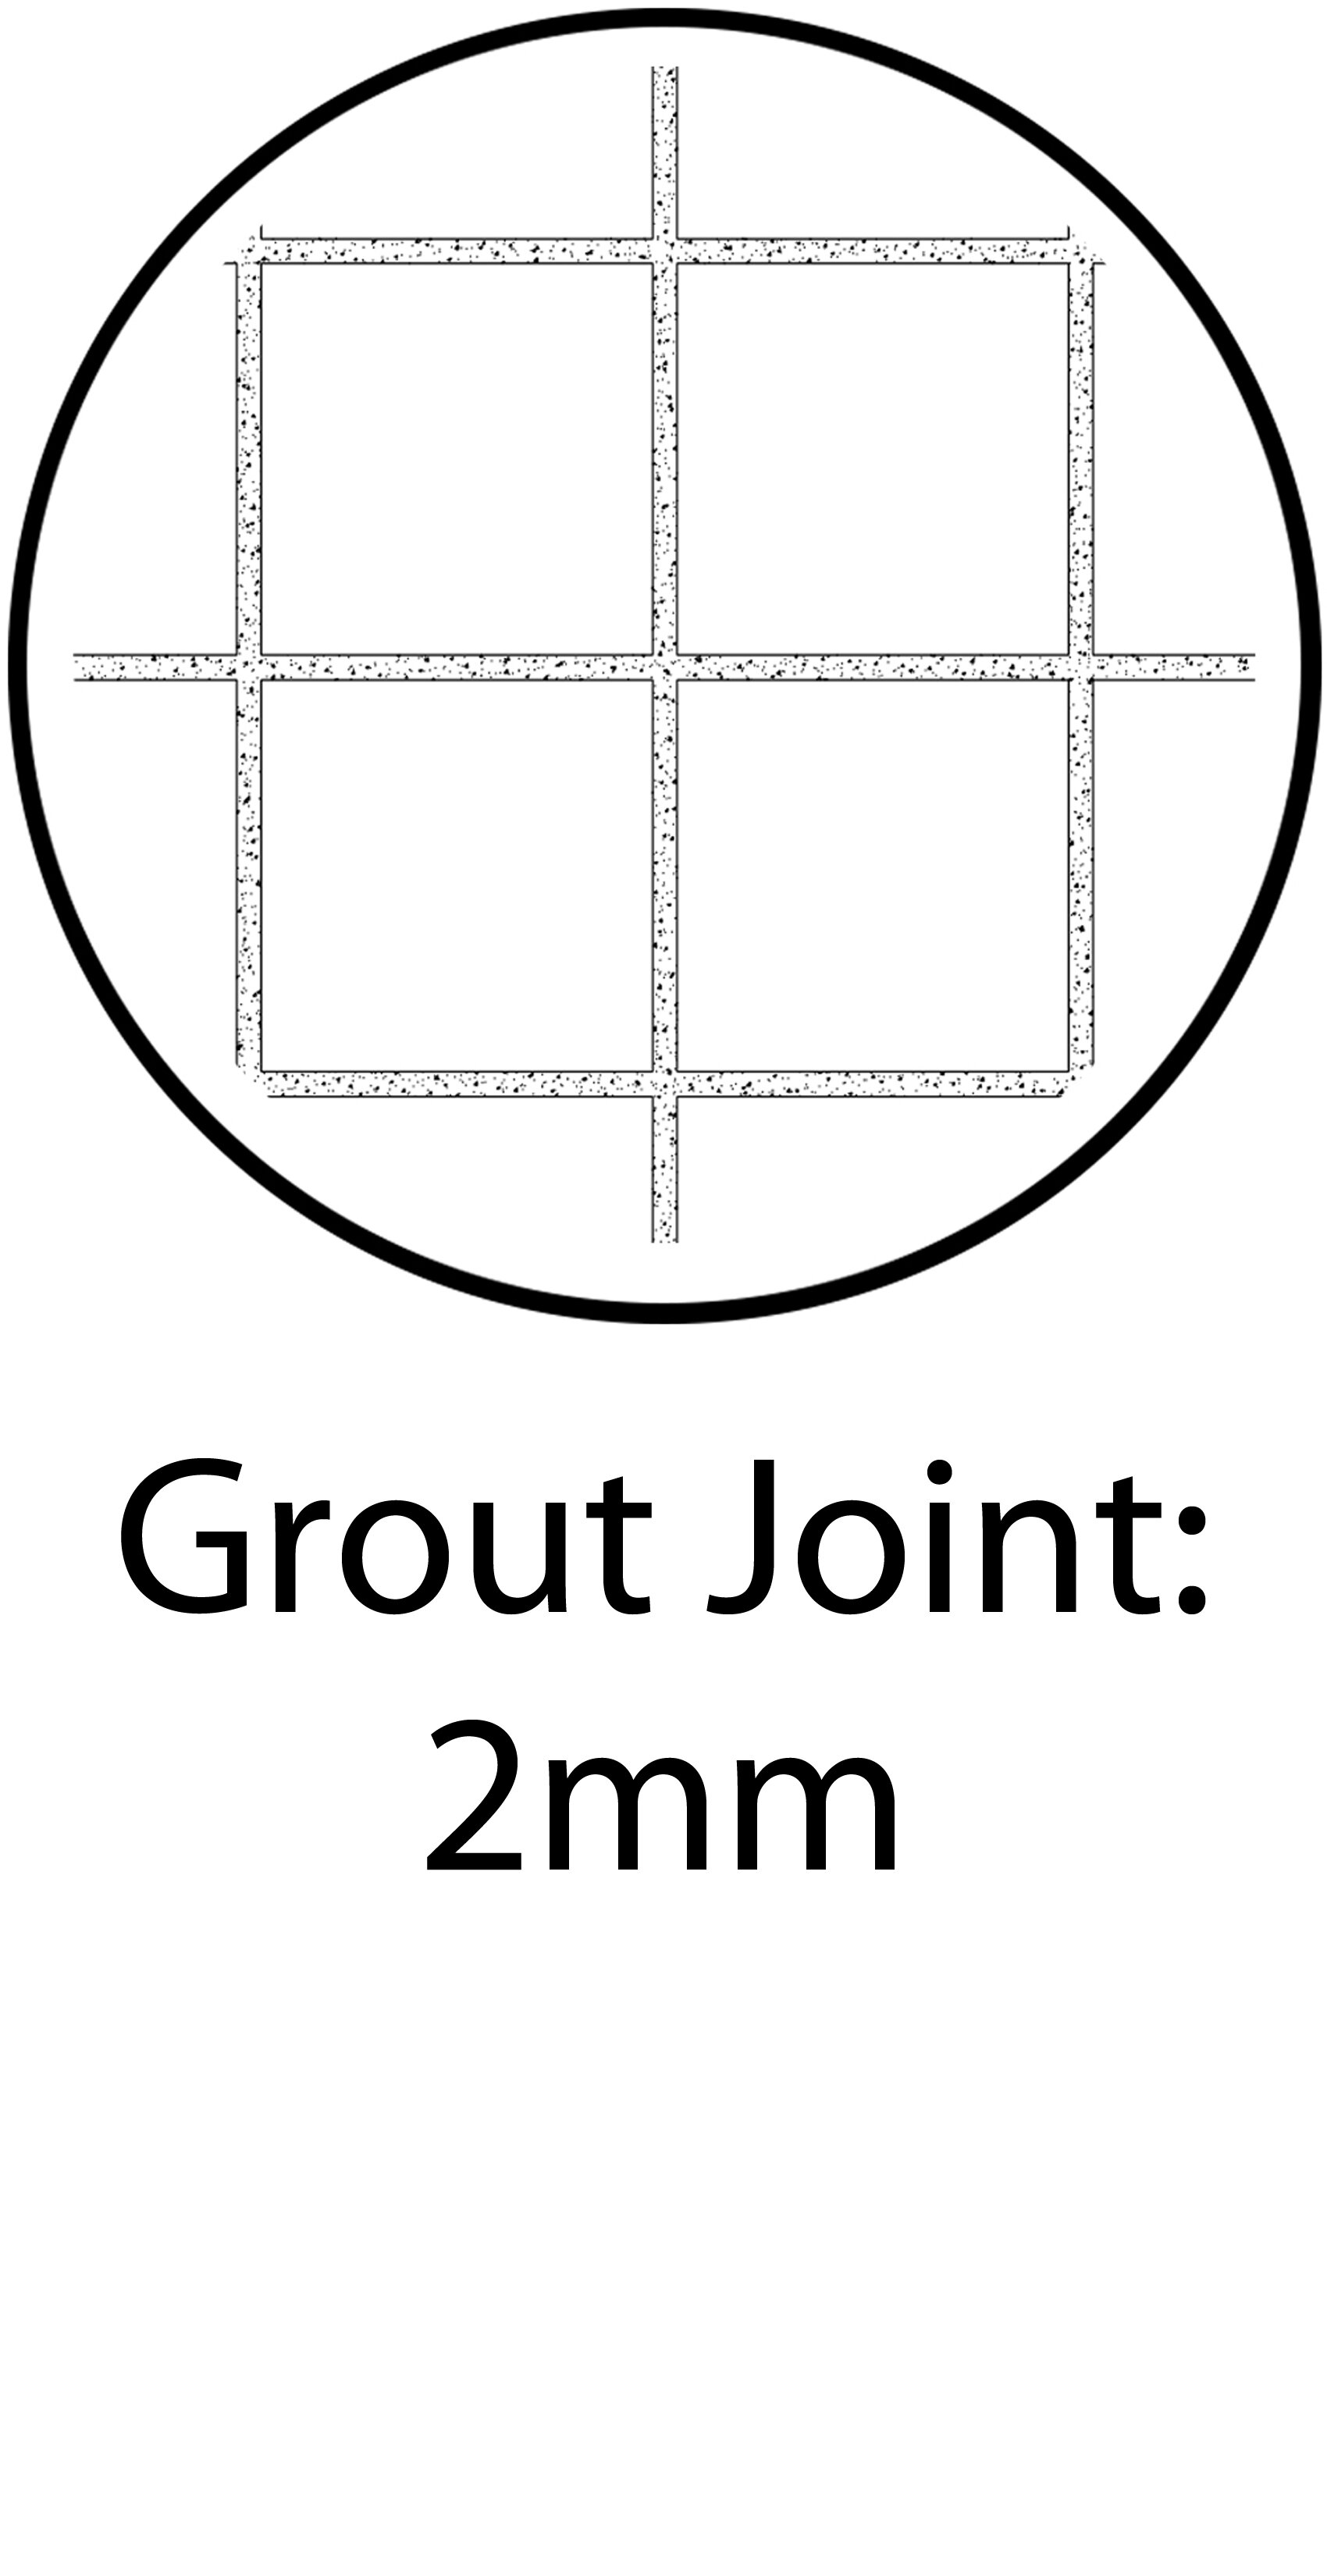 10_Grout Joint_2mm.jpg